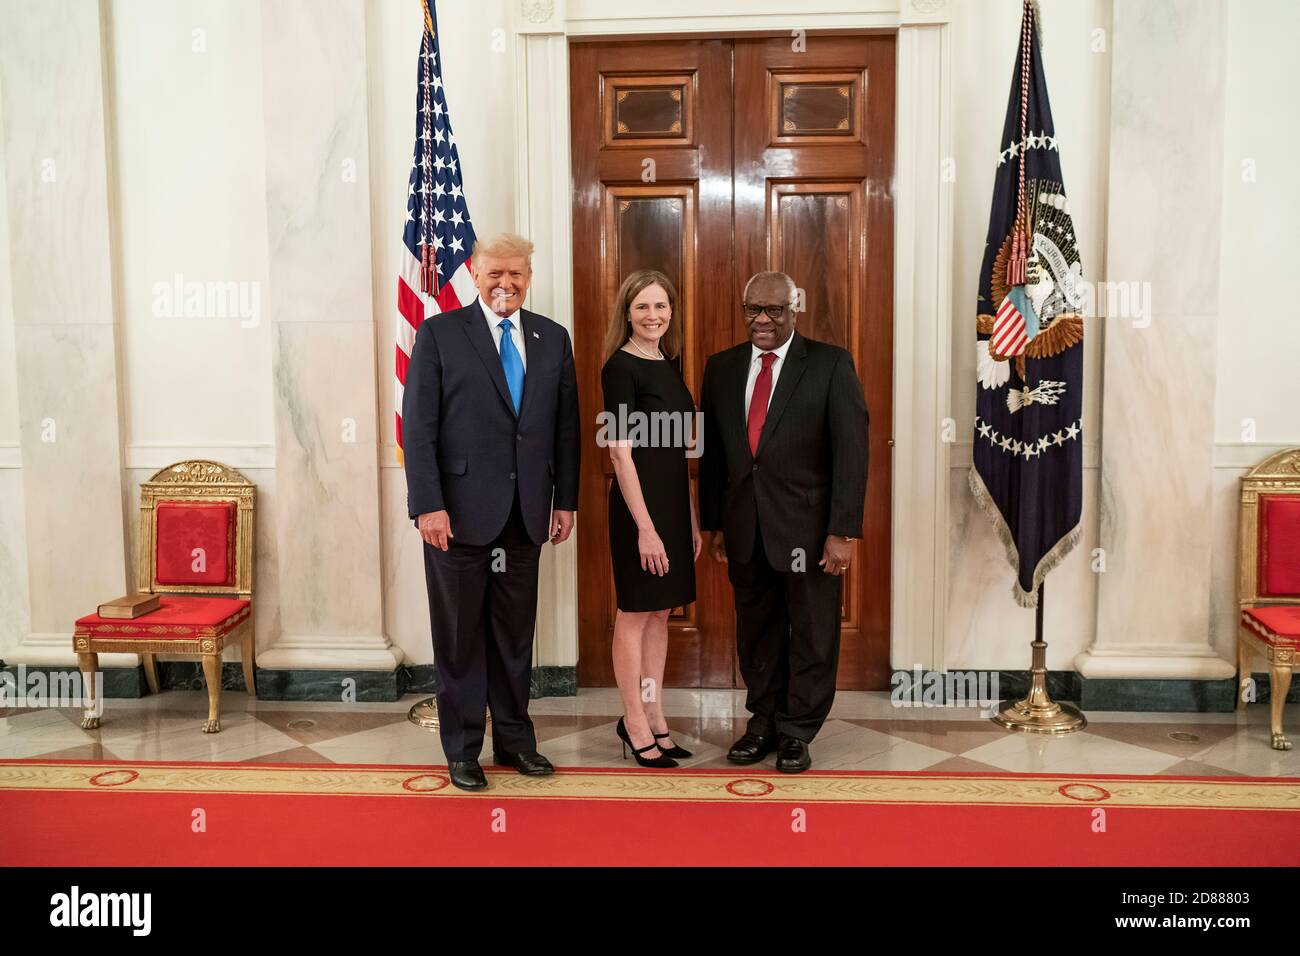 The Swearing-in Ceremony of the Honorable Amy Coney Barrett as Associate Justice of the US Supreme Court Stock Photo